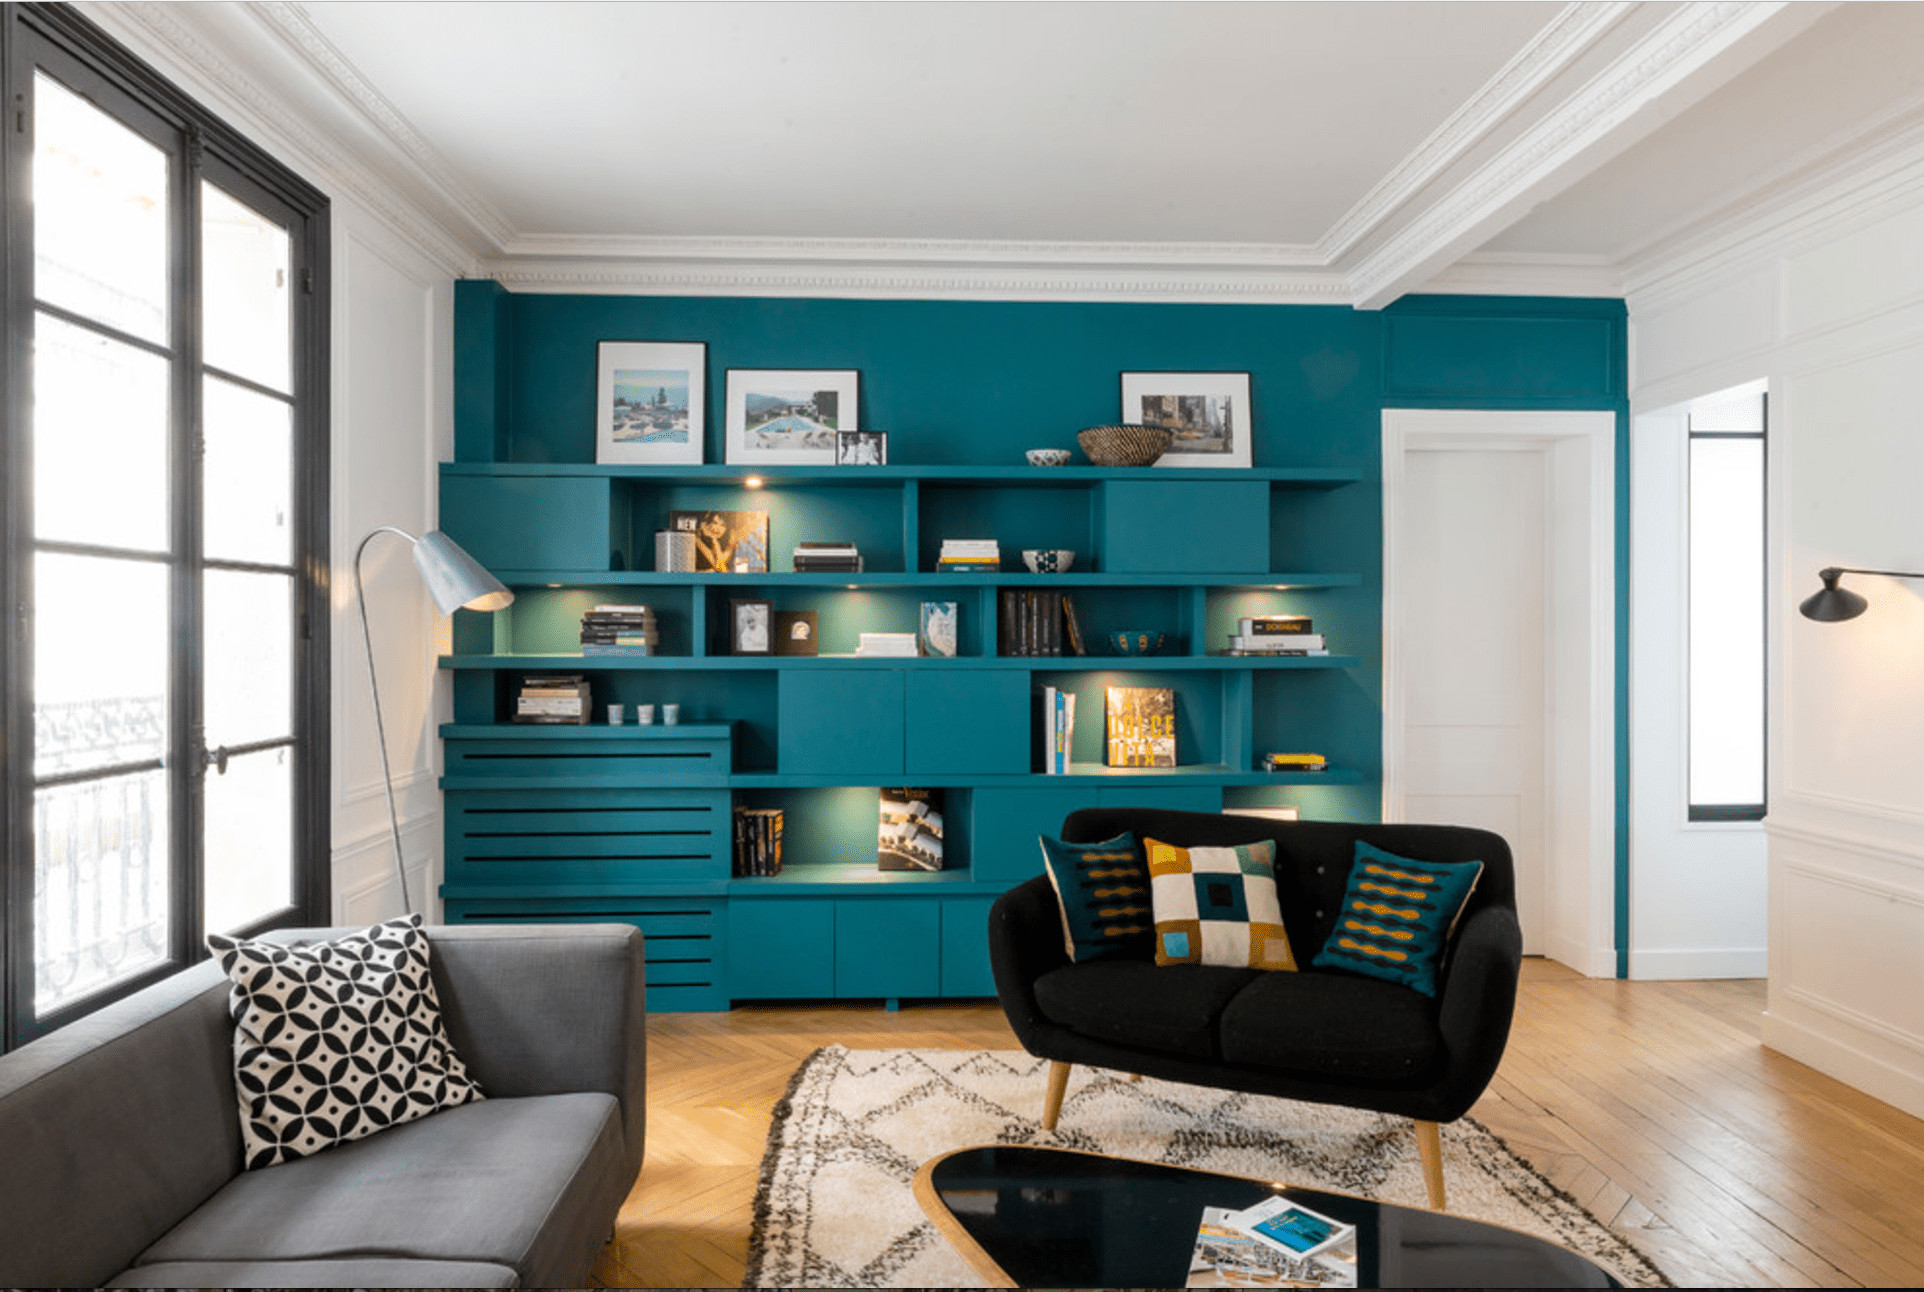 Living Room Accent Wall Colors
 Accent Walls Guide Choosing the Right Colors & Walls to Paint